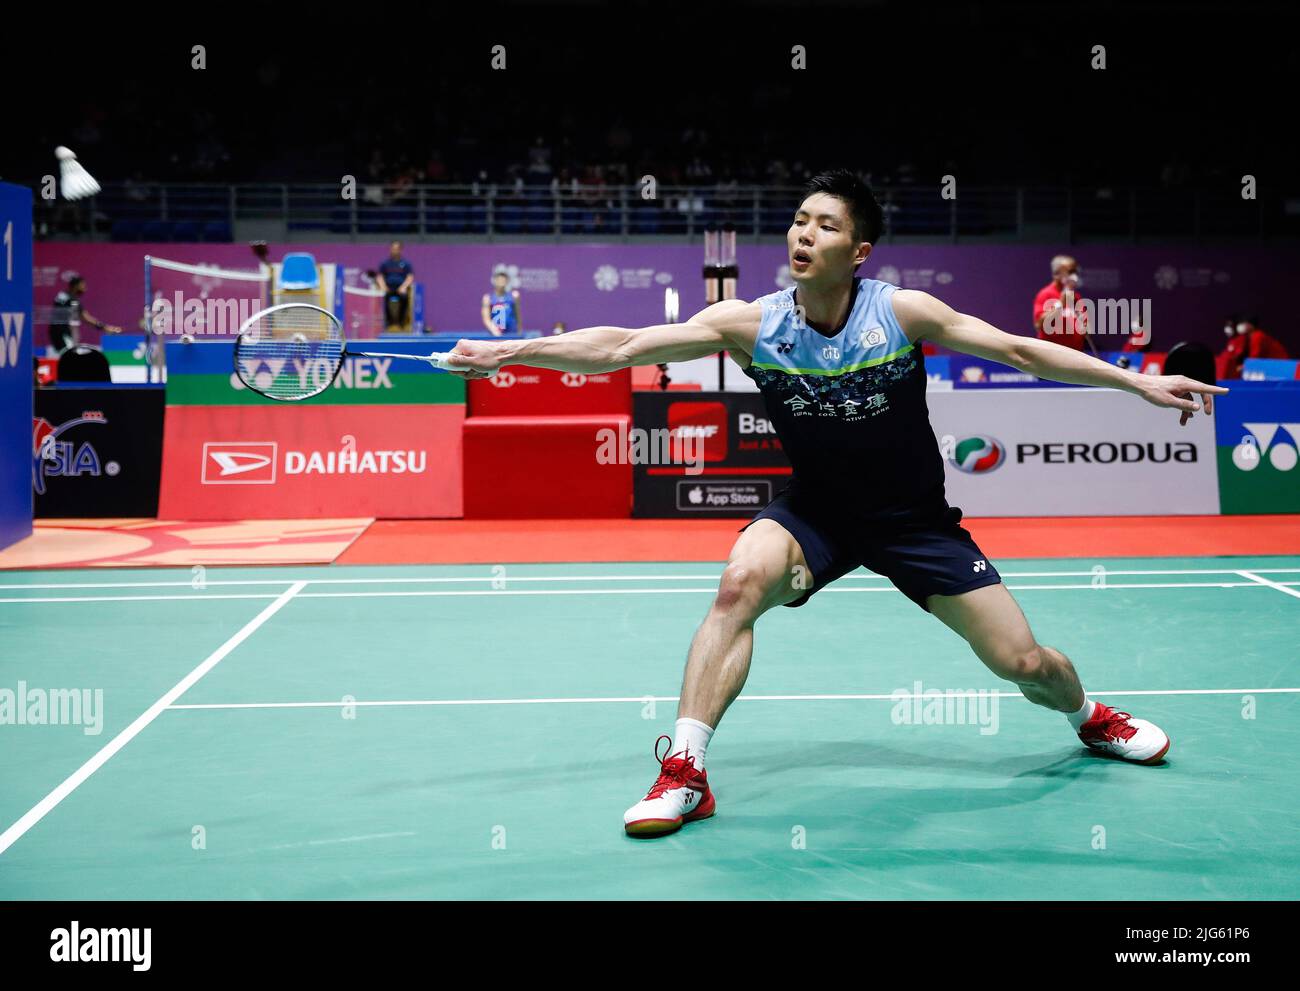 Kuala Lumpur, Malaysia. 07th July, 2022. Chou Tien Chen of Taiwan competes against Ng Tze Yong of Malaysia during the Men's Single round three match of the Perodua Malaysia Masters 2022 at Axiata Arena, Bukit Jalil. Chou Tien Chen Won, Score 21/18, 21/16. Credit: SOPA Images Limited/Alamy Live News Stock Photo